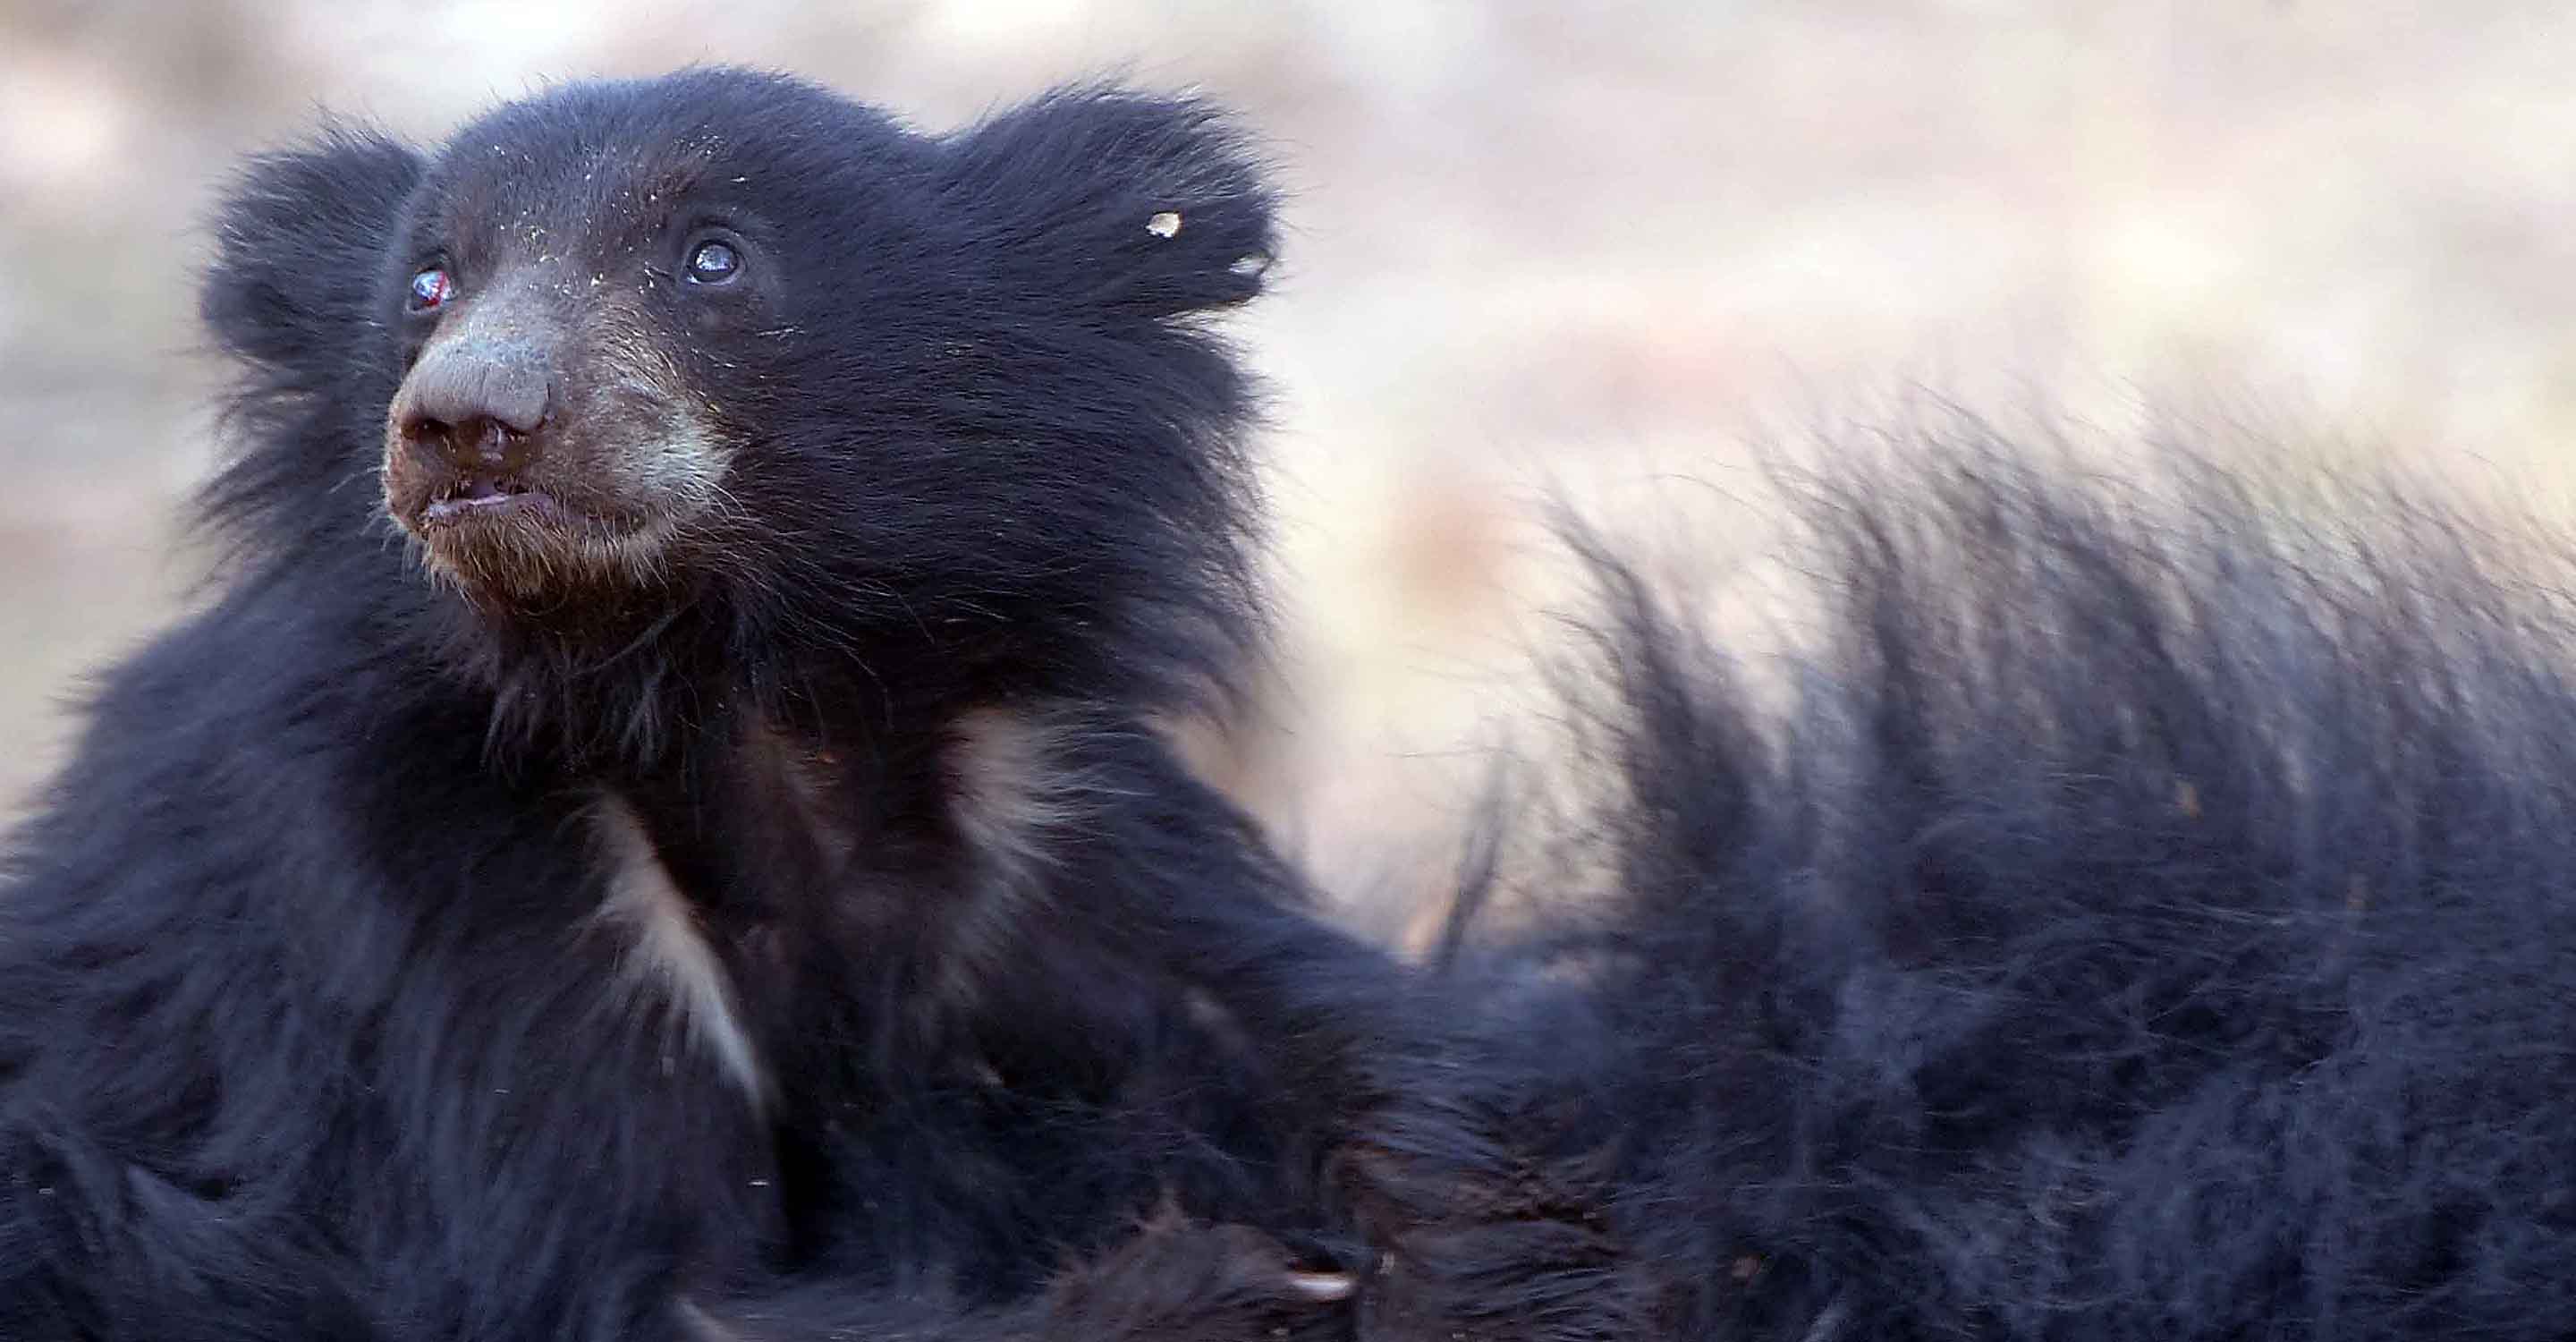 A close-up of a sloth bear cub lying on its mother in Ranthambore National Park, India